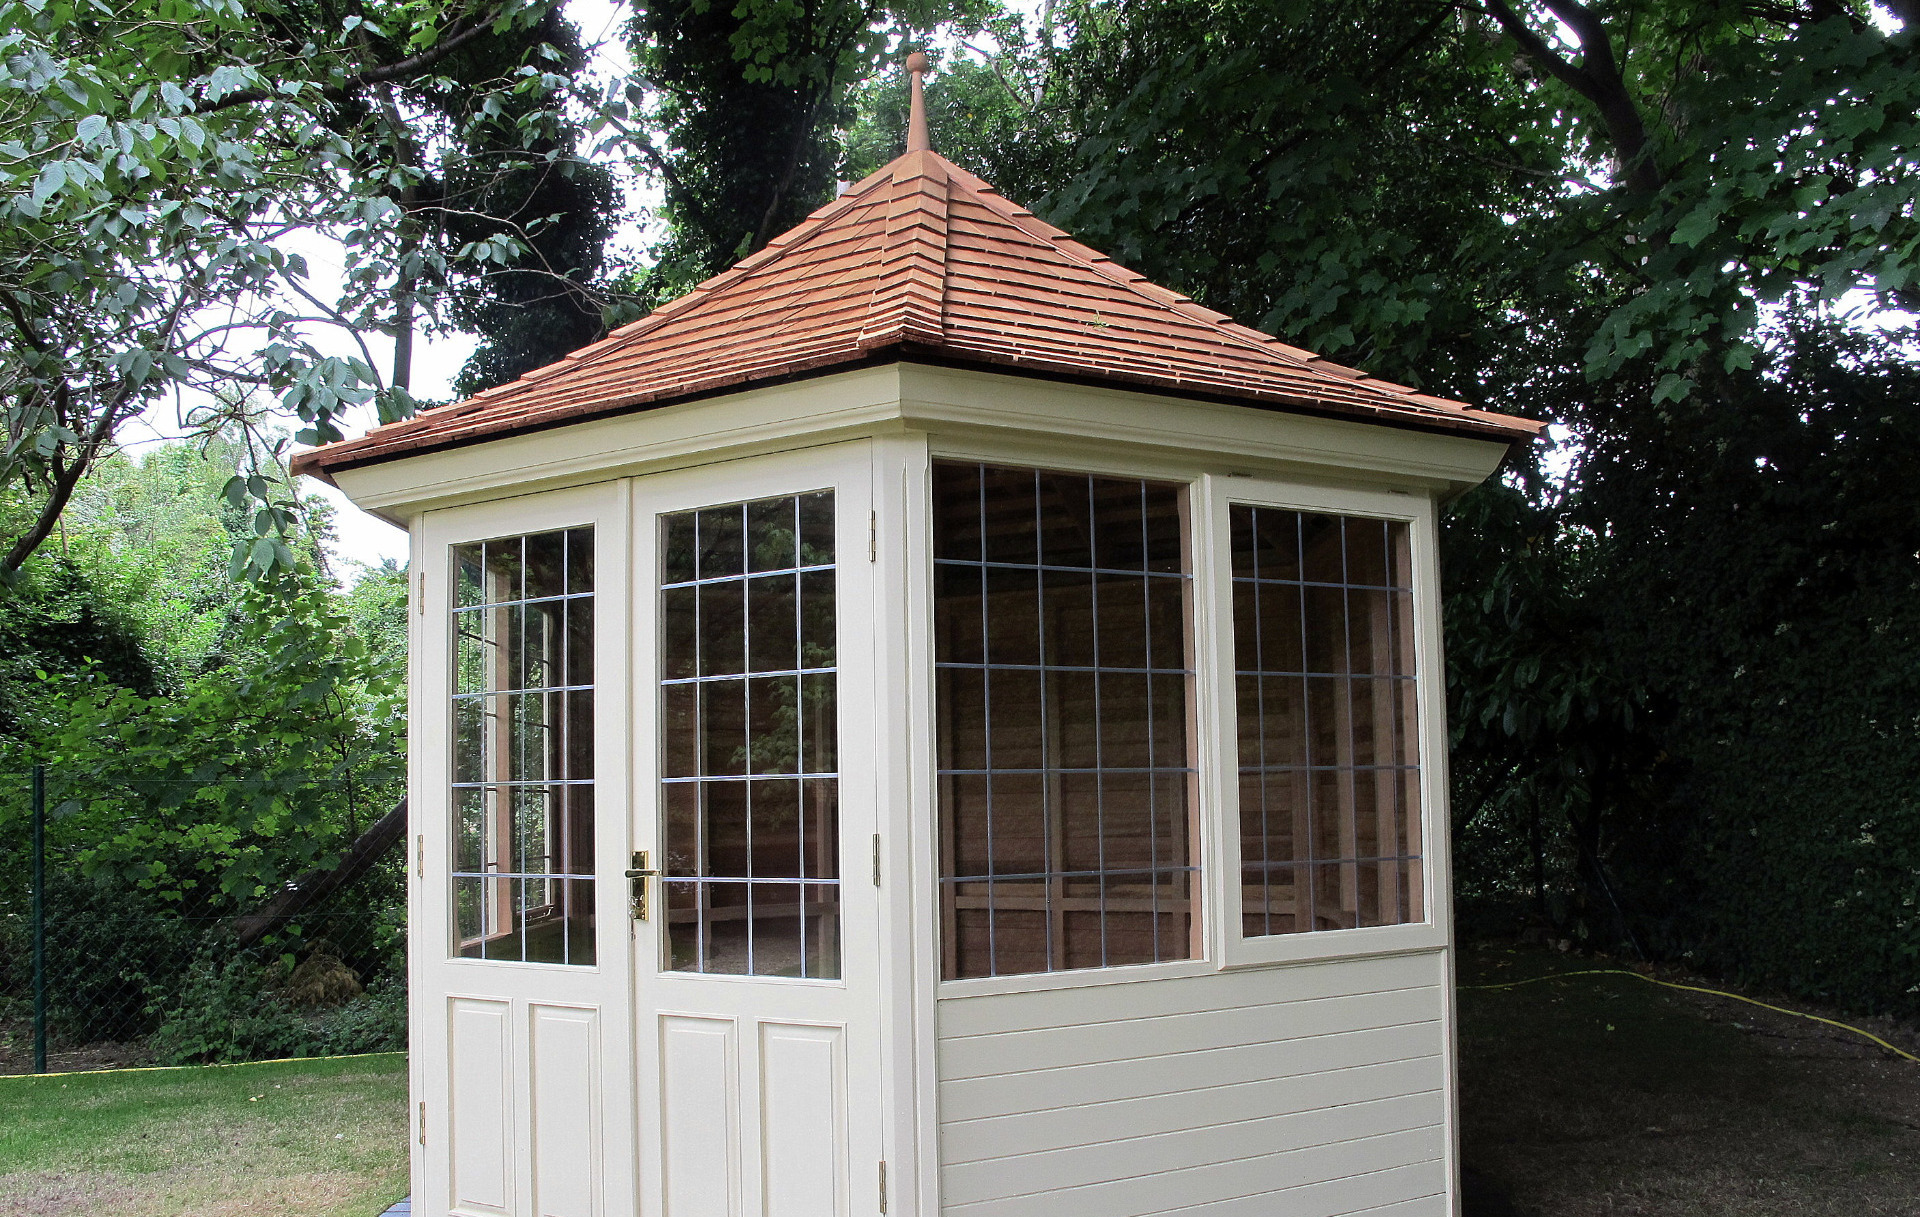 Classic Timber Summerhouse with painted finish in Booterstown, Co Dublin.